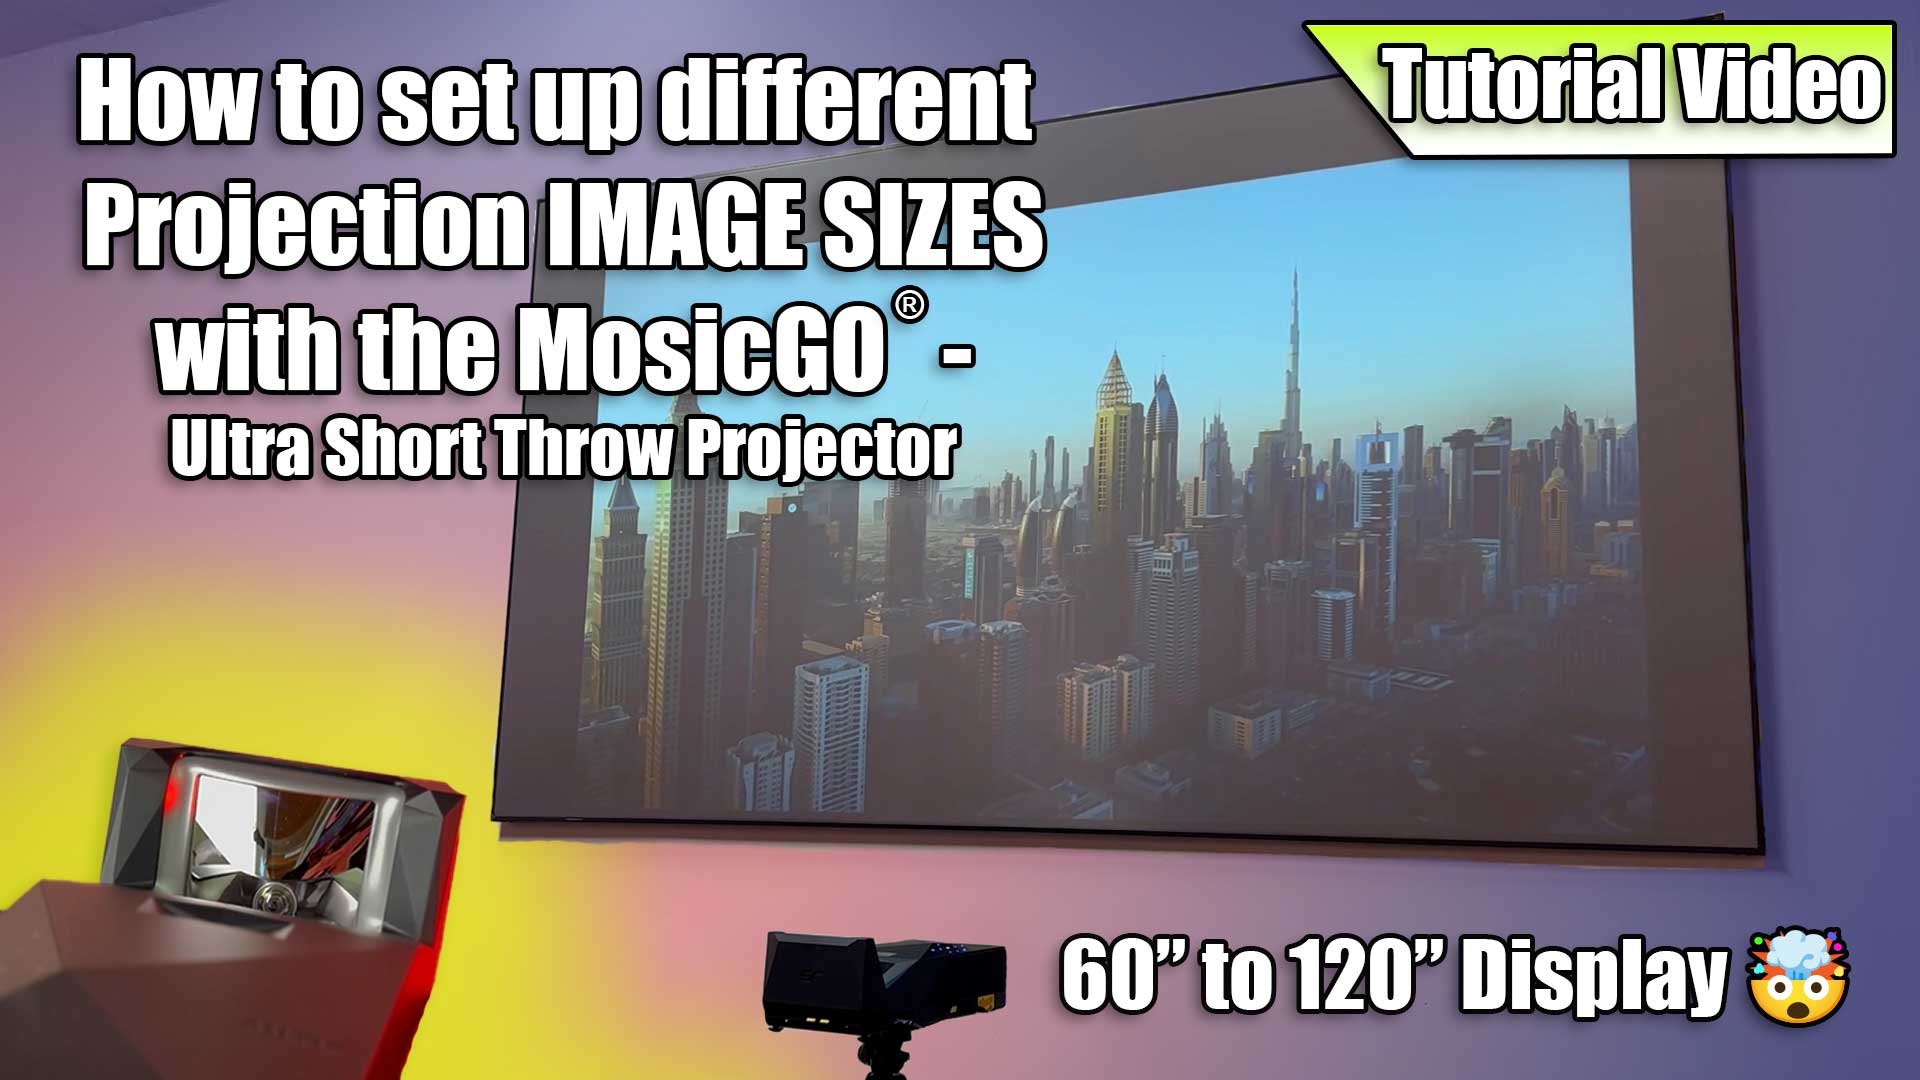 A Step-by-Step Tutorial for different Projection IMAGE SIZES with the MosicGO® Projector